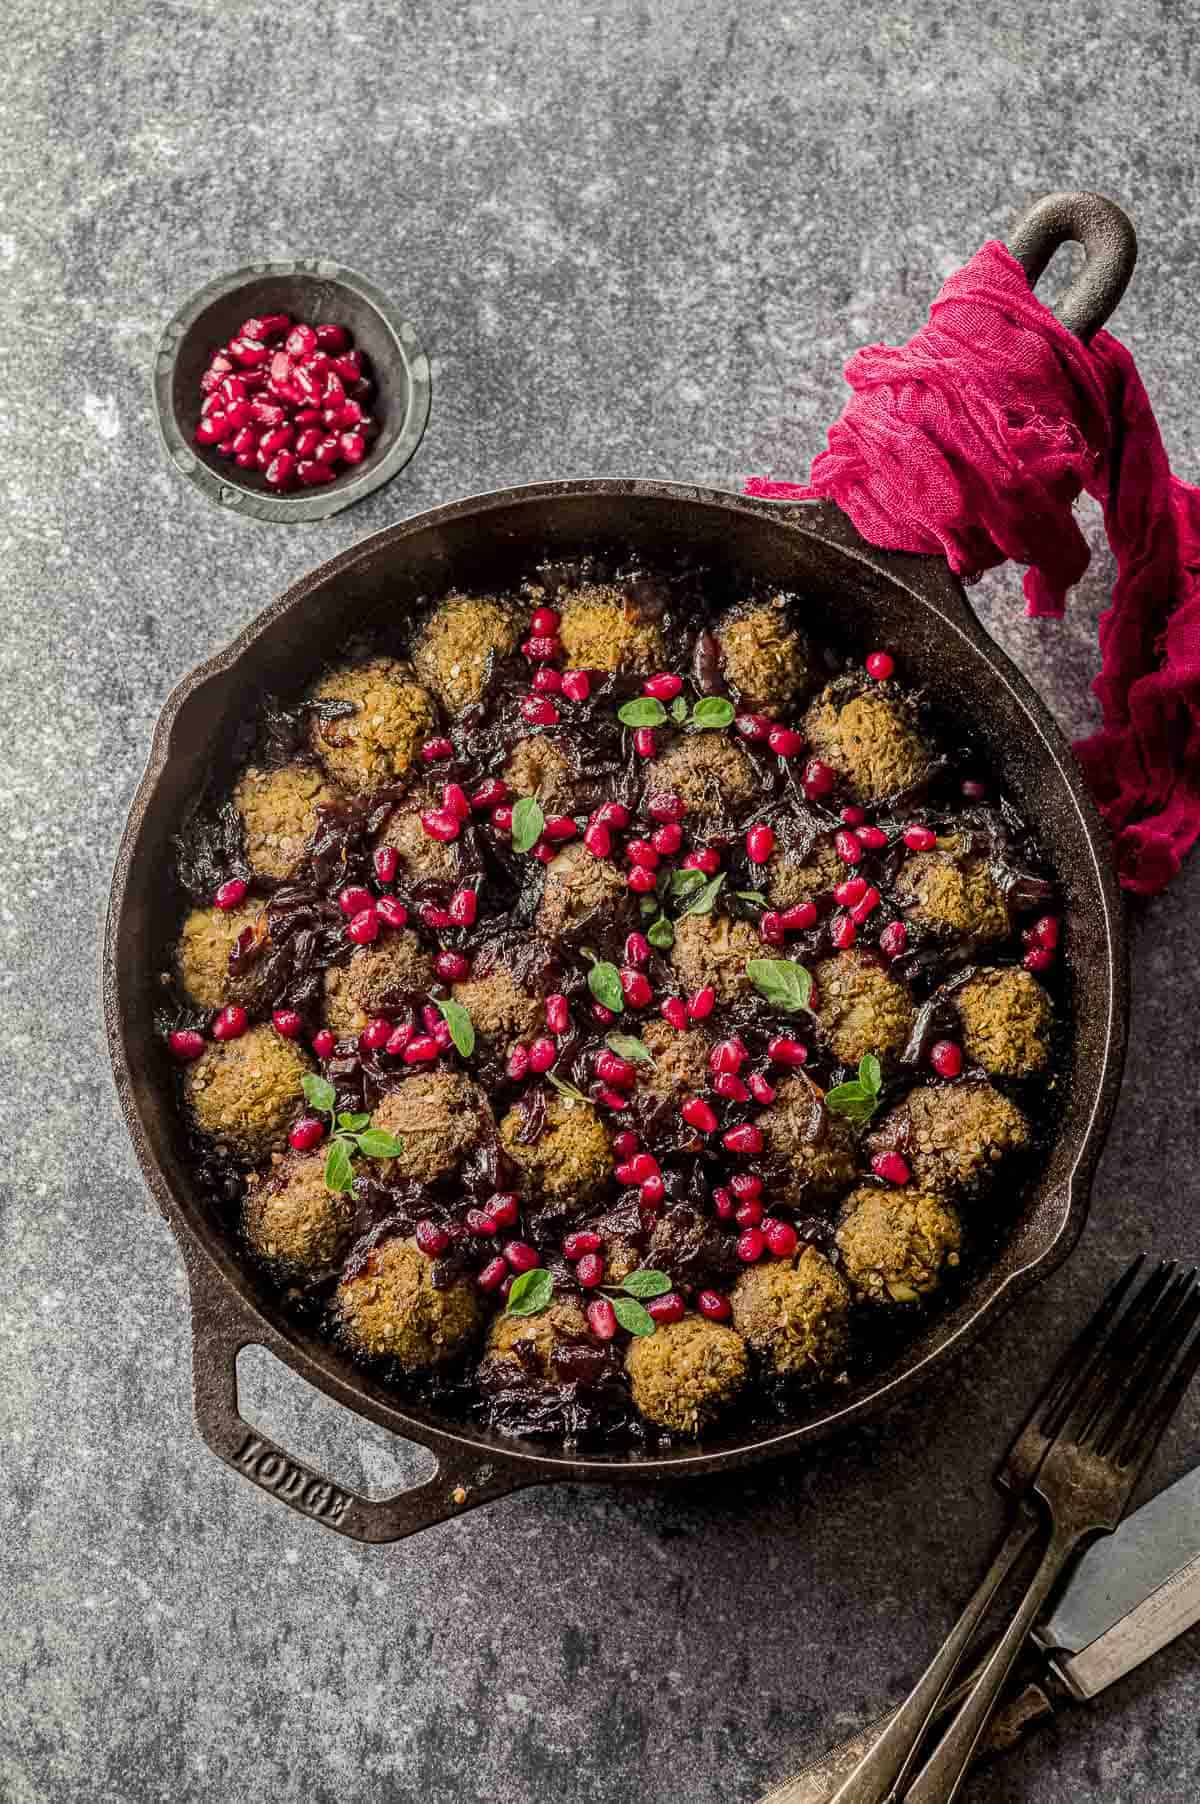 Overhead view of a skillet with eggplant meatballs in pomegranate sauce